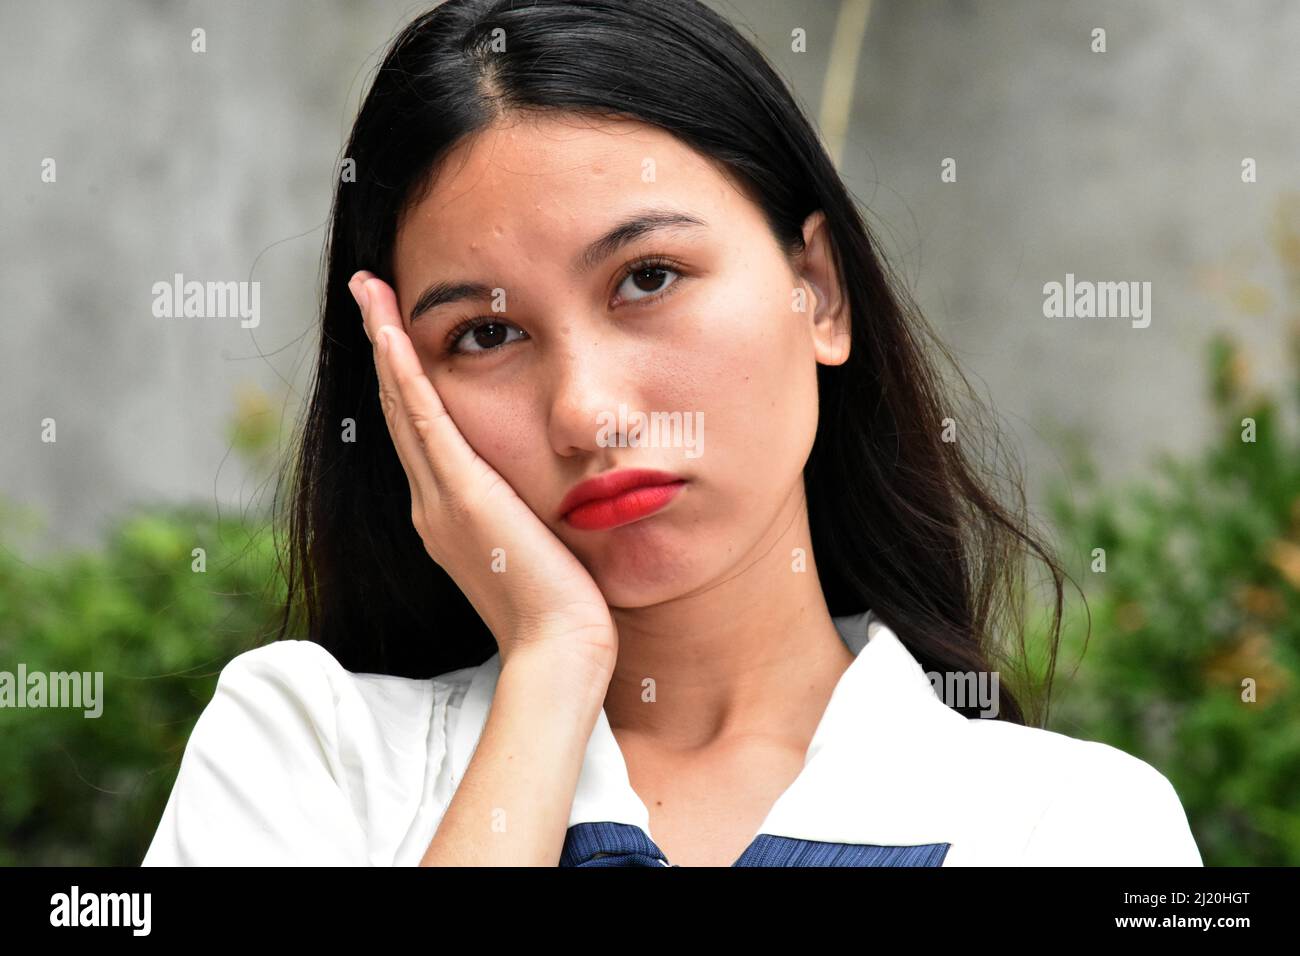 A Sad Disappointed Asian Woman Stock Photo